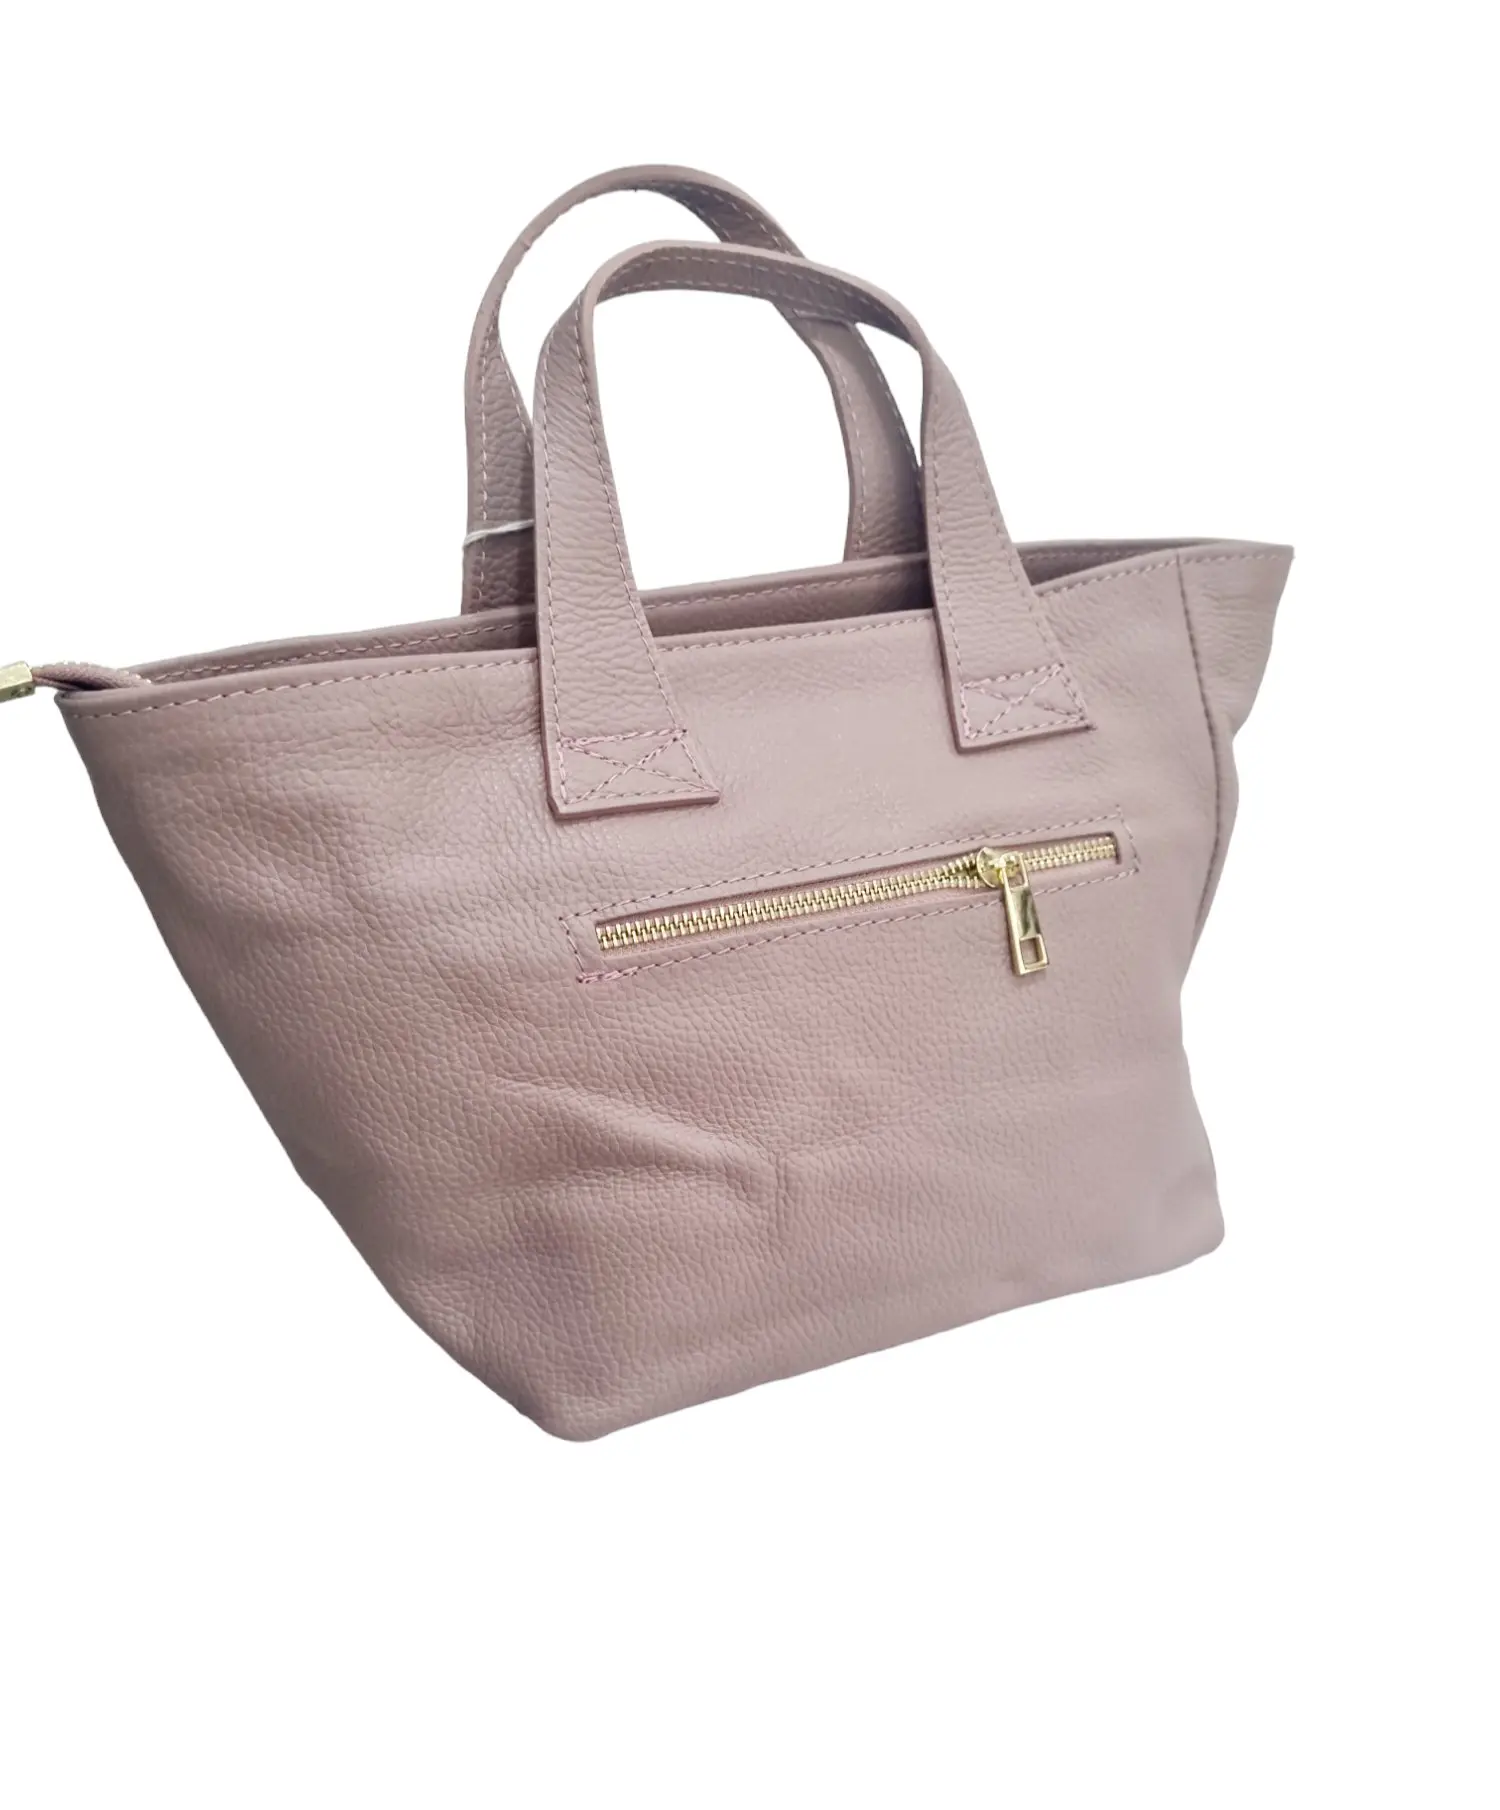 Genuine leather bag, made in Italy, powder pink, with external zip pocket. internal zip closure single lined pocket with side pockets. Equipped with shoulder strap. Measurements H24 B13 L25